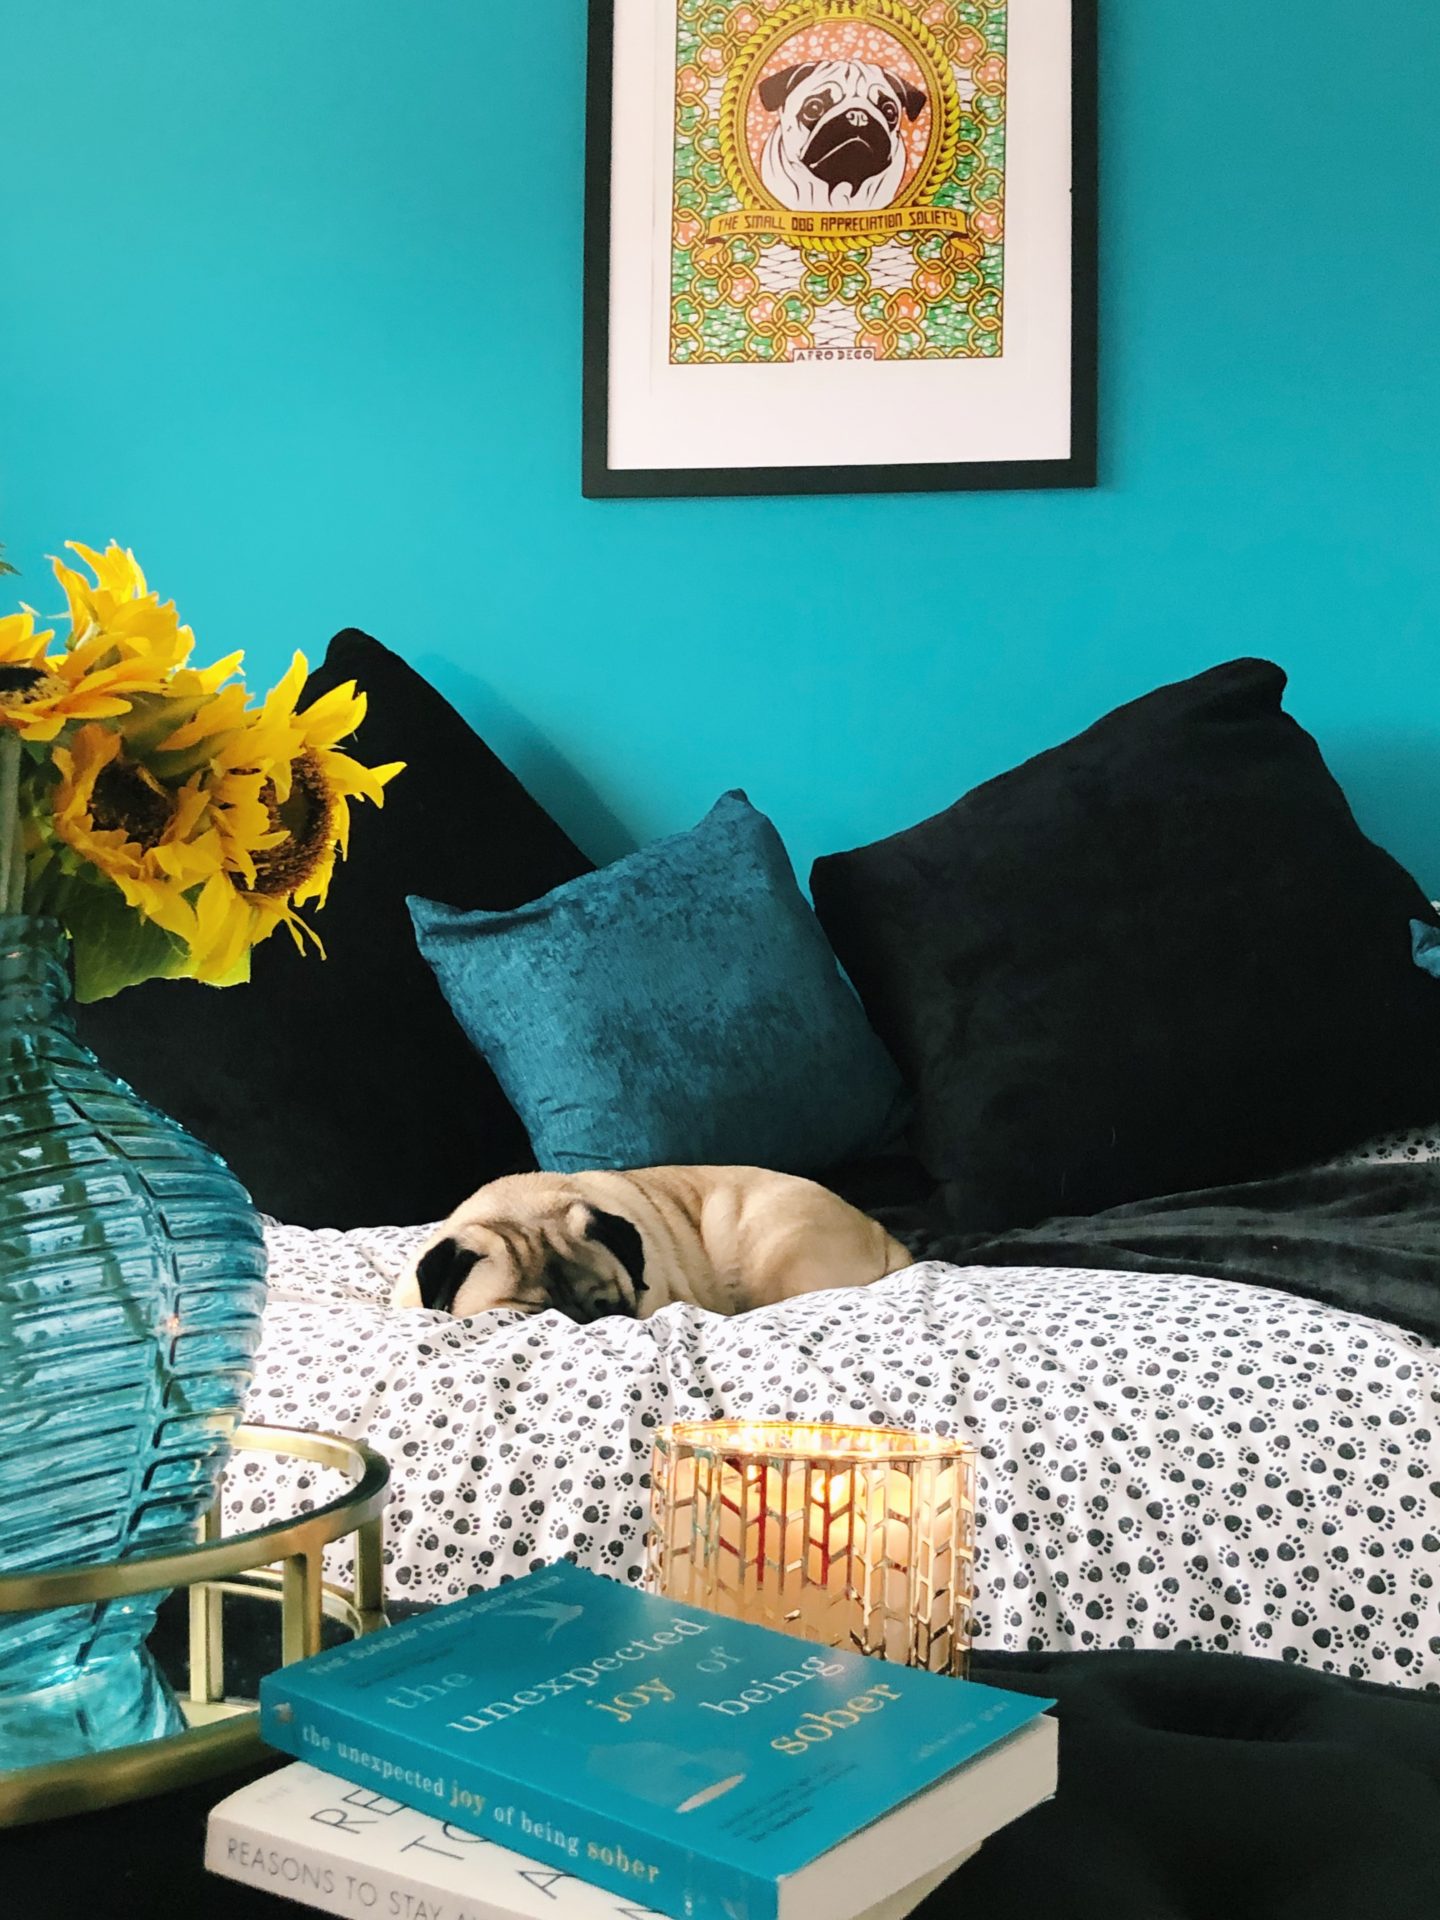 Spare Bedroom Makeover with Day bed, teal wall and black and gold accessories